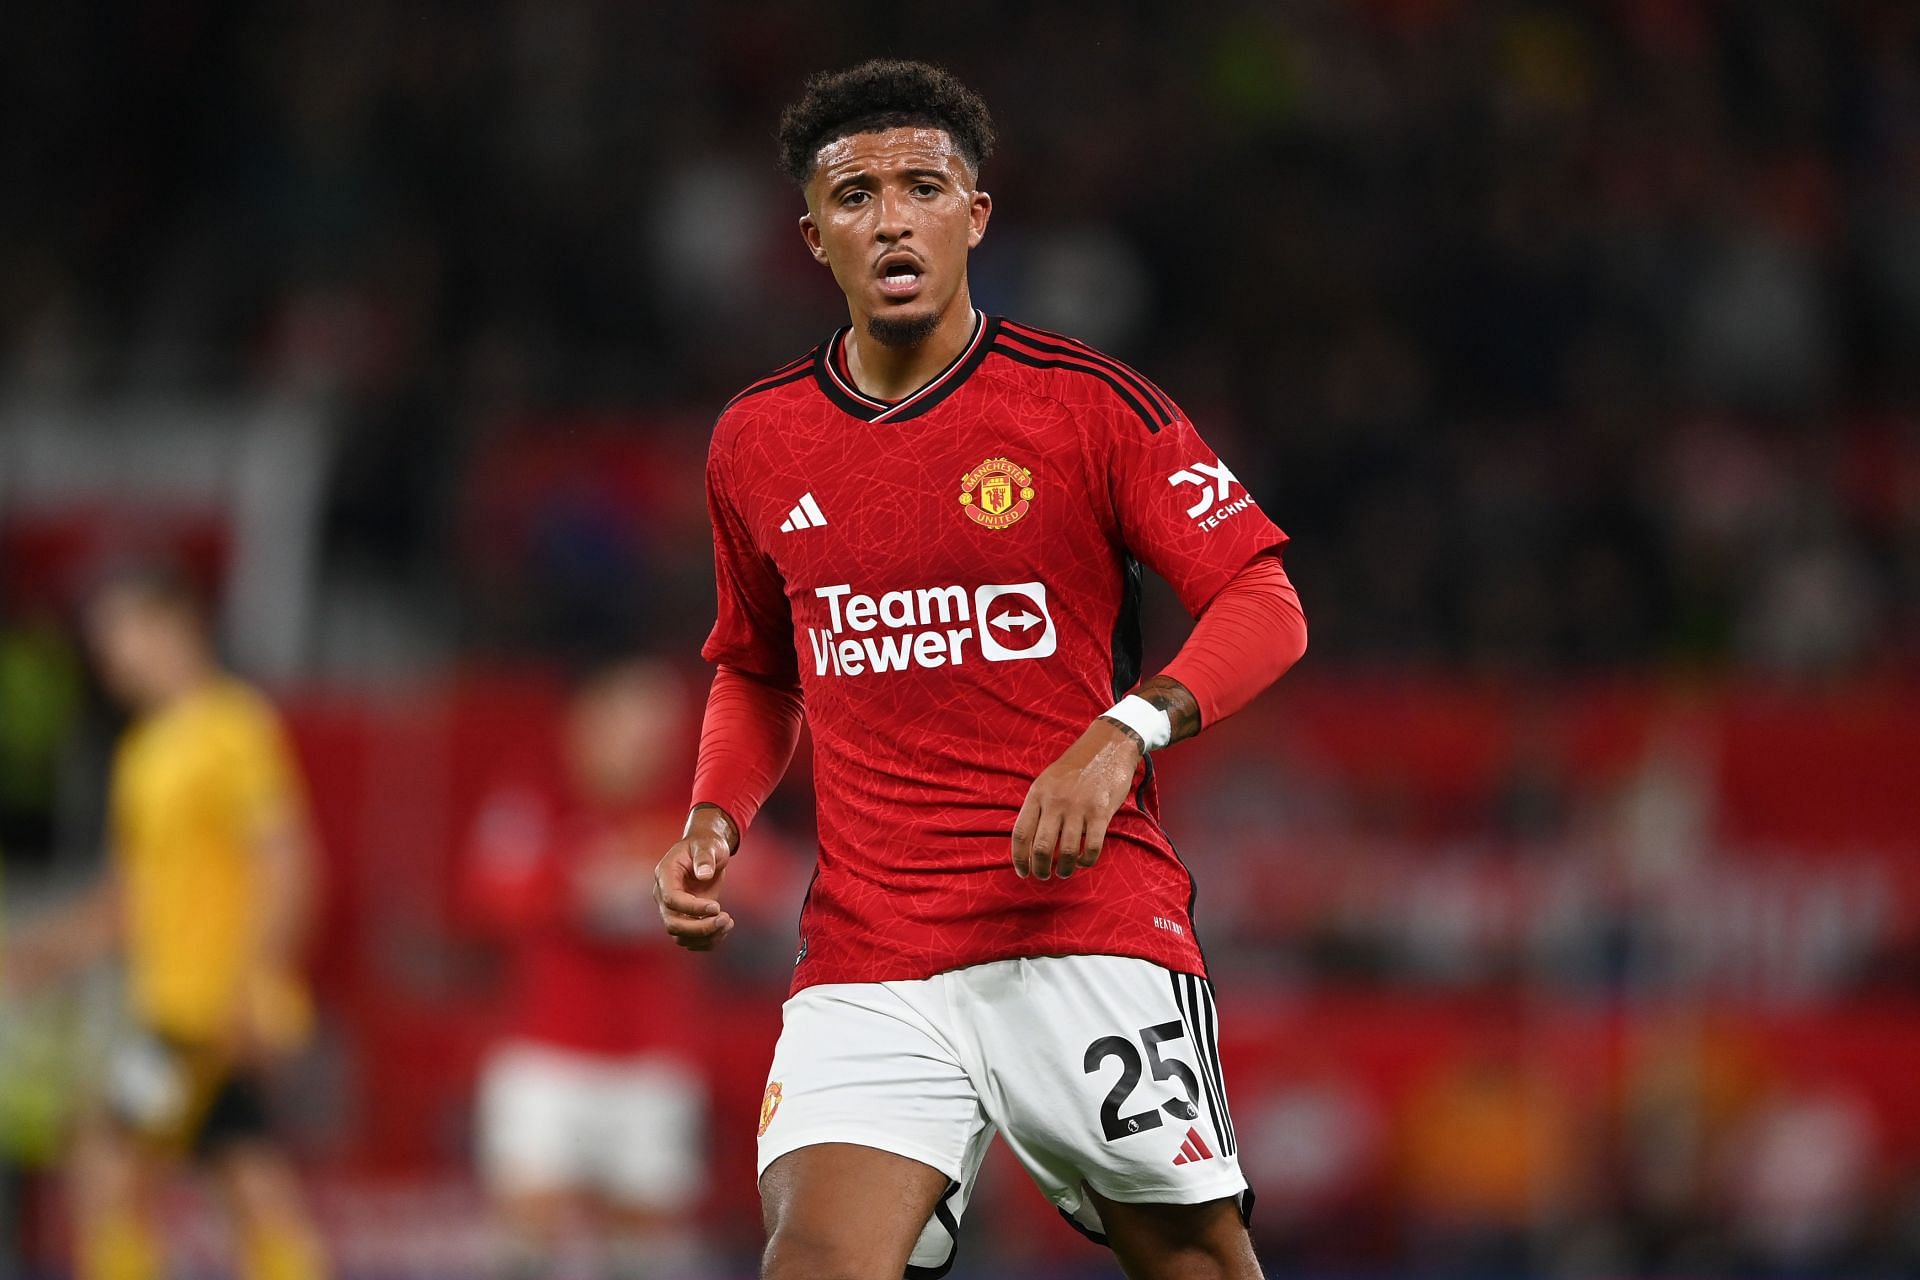 Jadon Sancho could leave Old Trafford in January